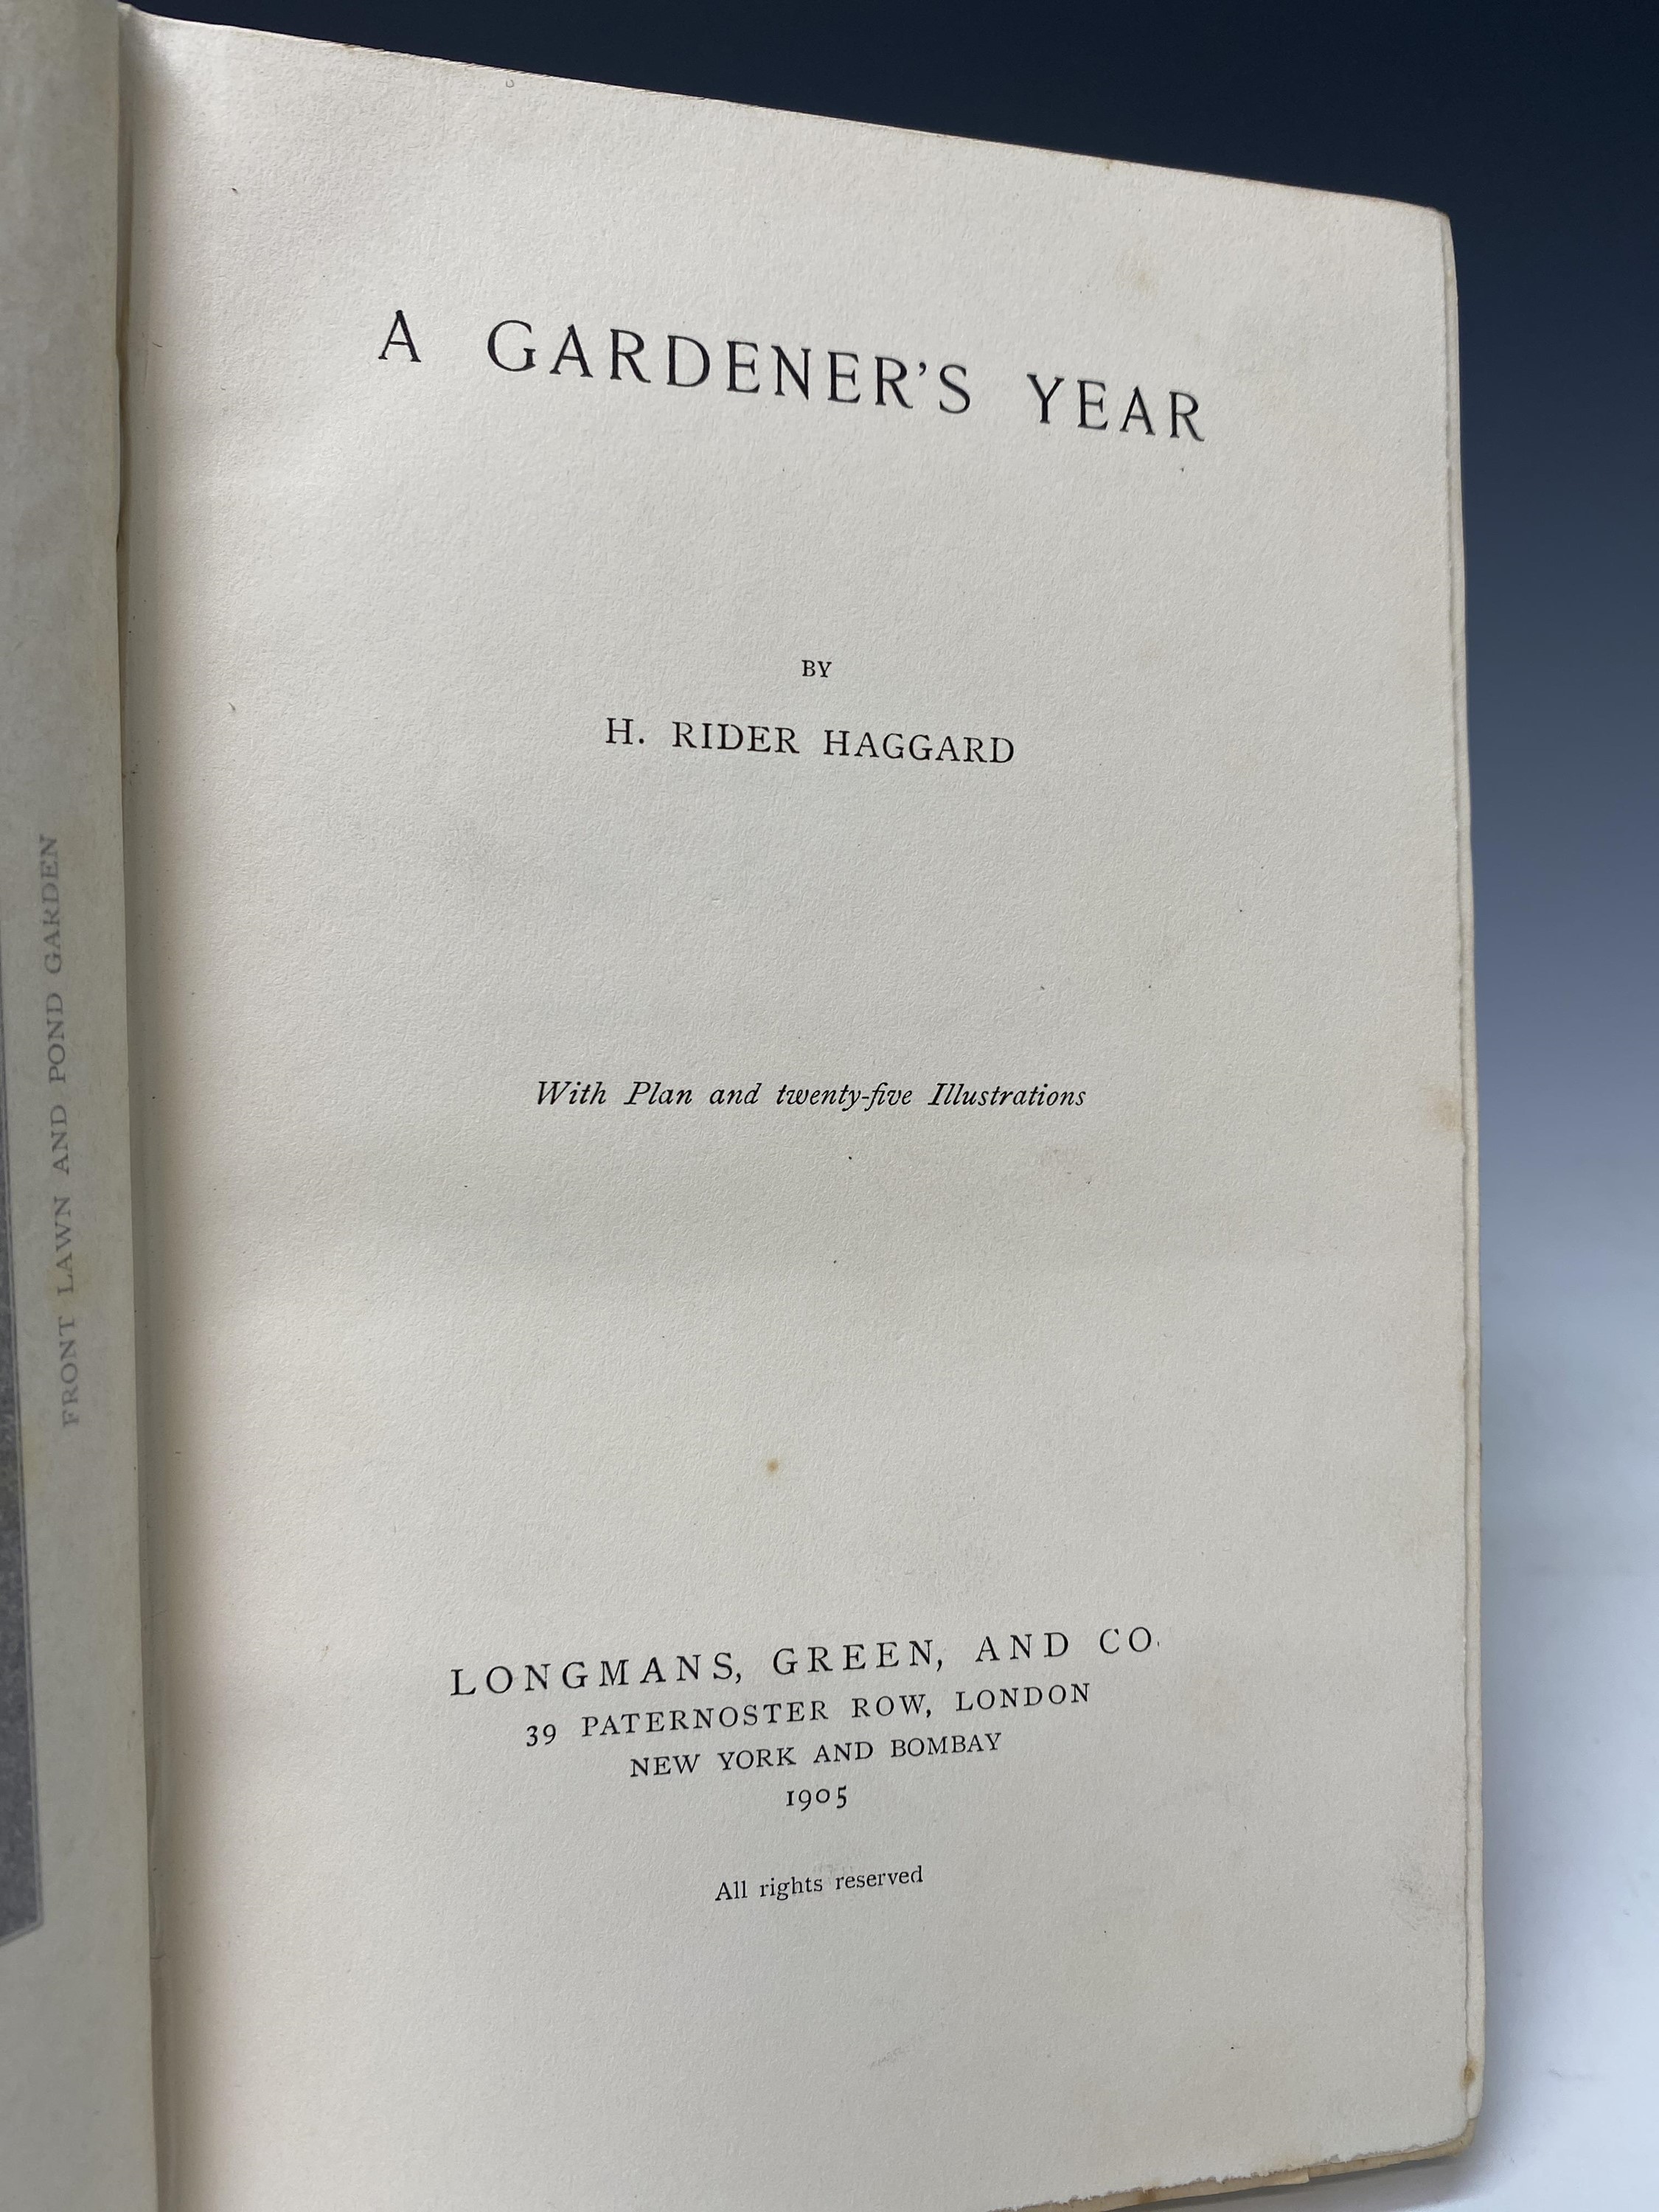 H. RIDER HAGGARD. 'A Gardener's Year.' First edition, original cloth, slight fading to cloth, - Image 2 of 4